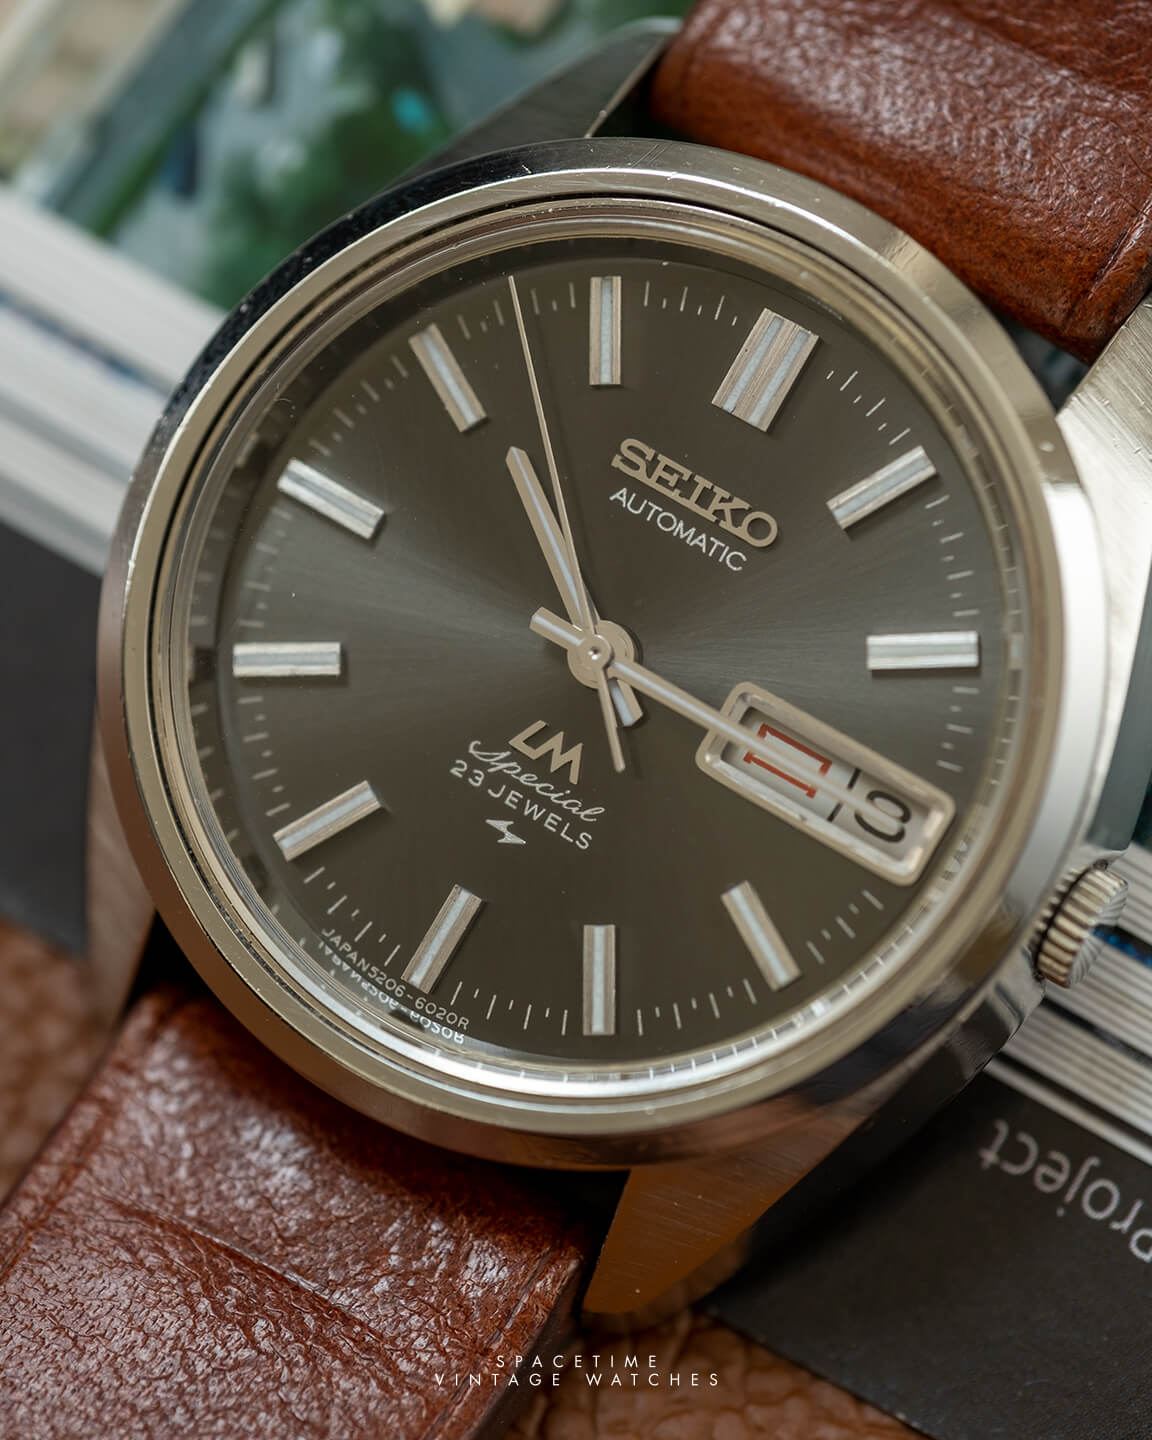 SEIKO LM SPECIAL ref 5206 – Spacetime